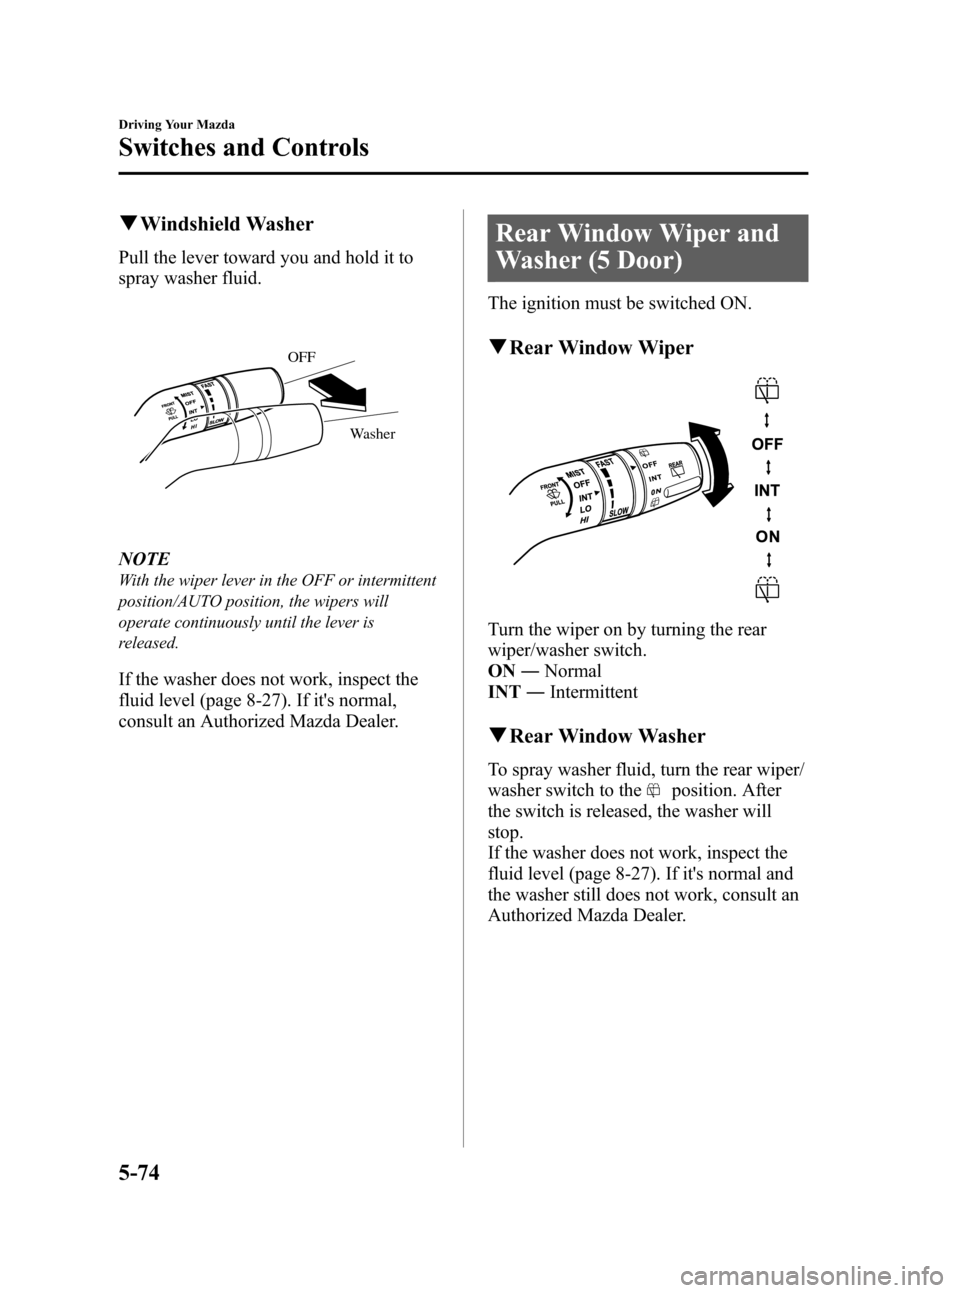 MAZDA MODEL 3 HATCHBACK 2012  Owners Manual (in English) Black plate (236,1)
qWindshield Washer
Pull the lever toward you and hold it to
spray washer fluid.
Washer
OFF
NOTE
With the wiper lever in the OFF or intermittent
position/AUTO position, the wipers w